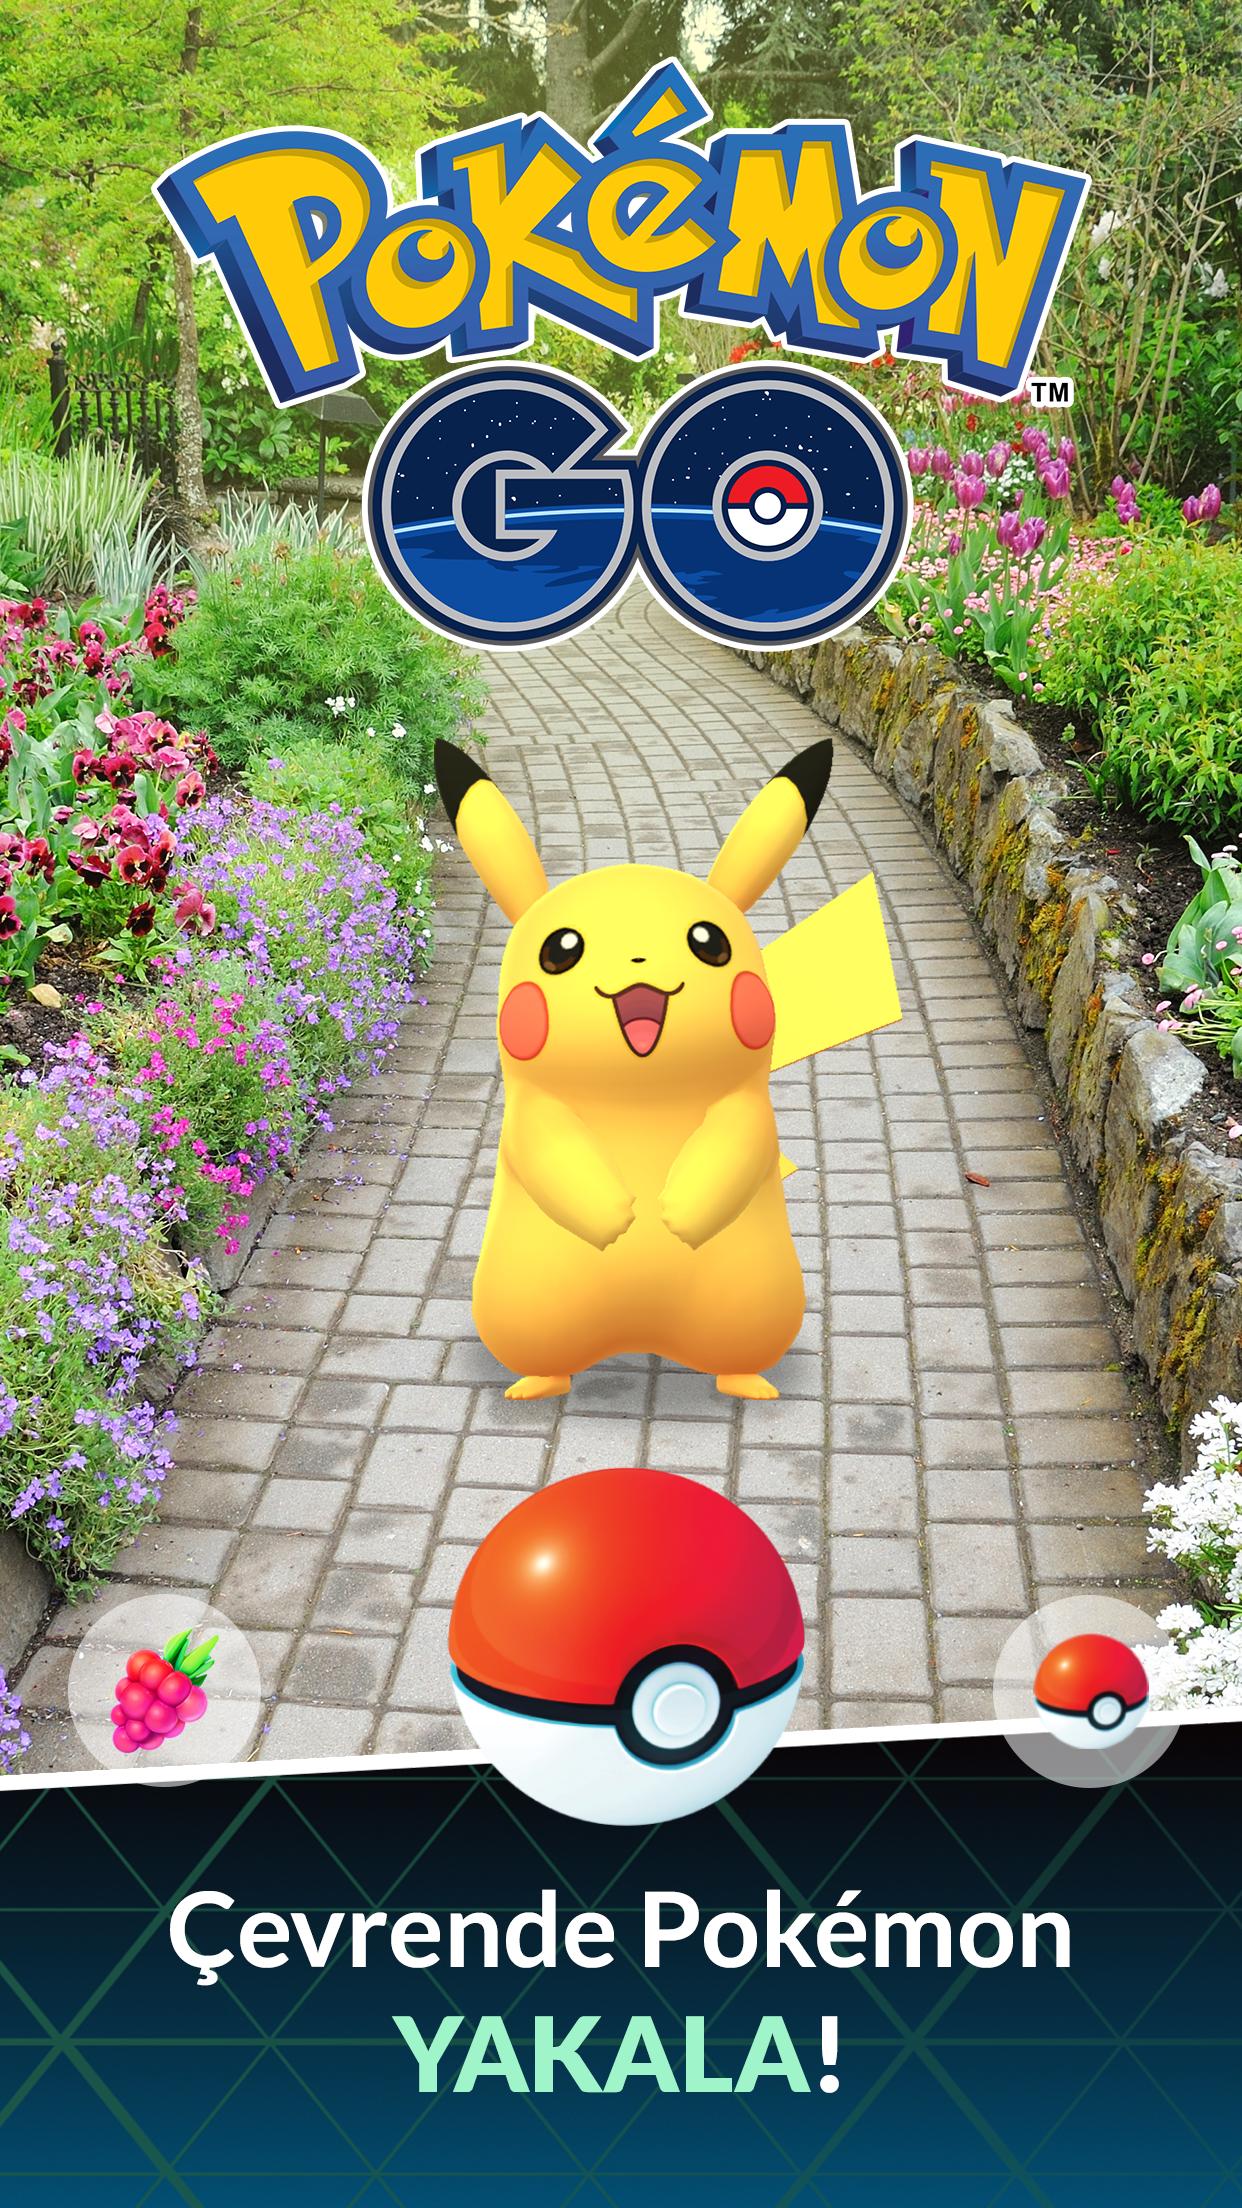 Pokémon GO APK 0.229.1 Download, the best real world adventure game for  Android